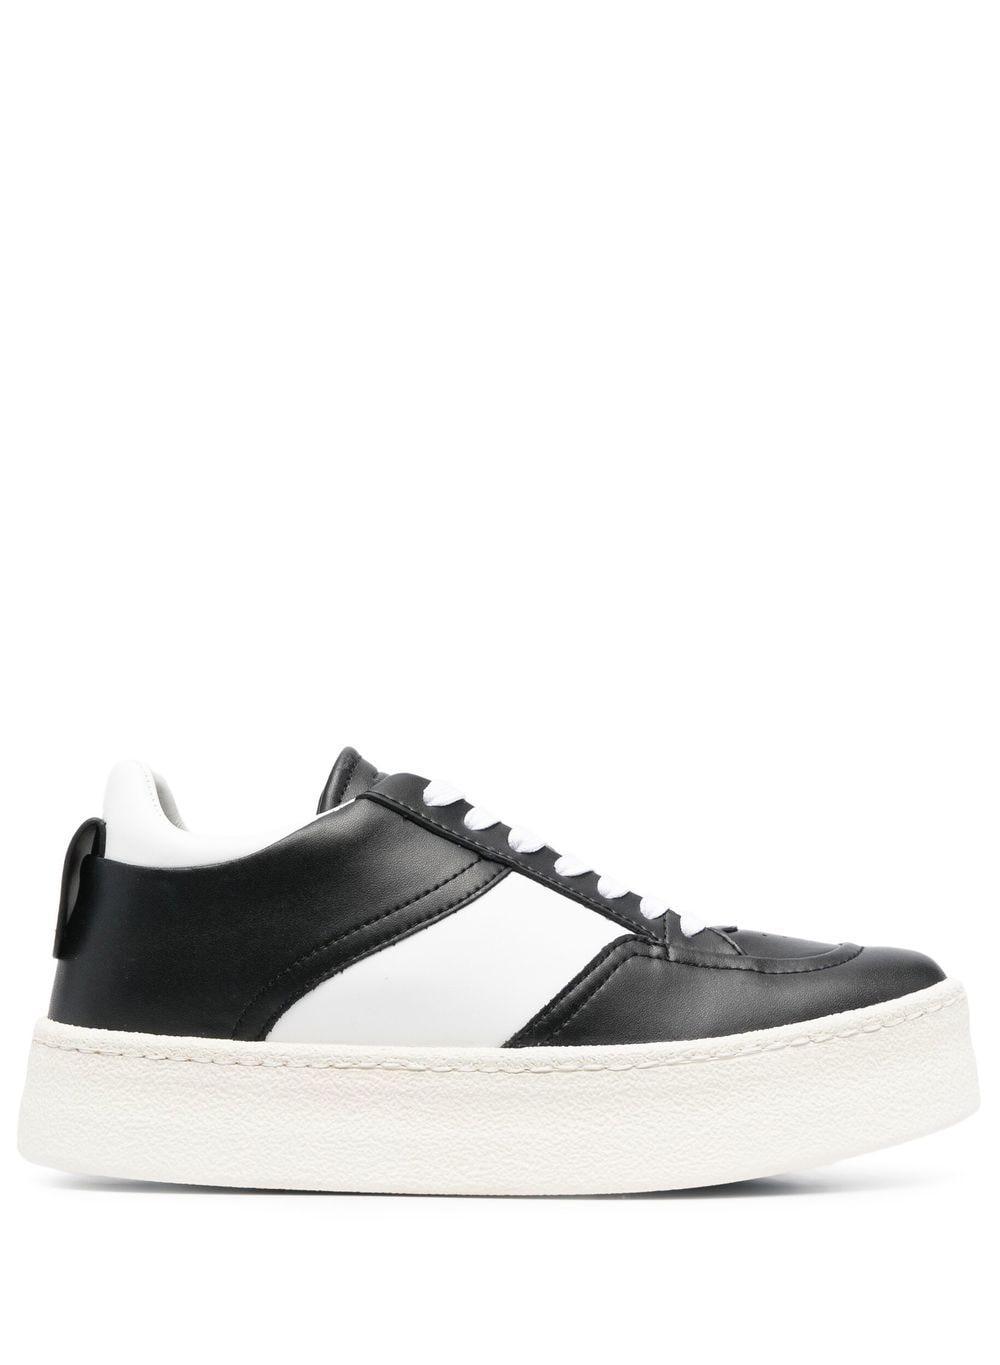 Emporio Armani Side-stripe Lace-up Sneakers in Black | Lyst